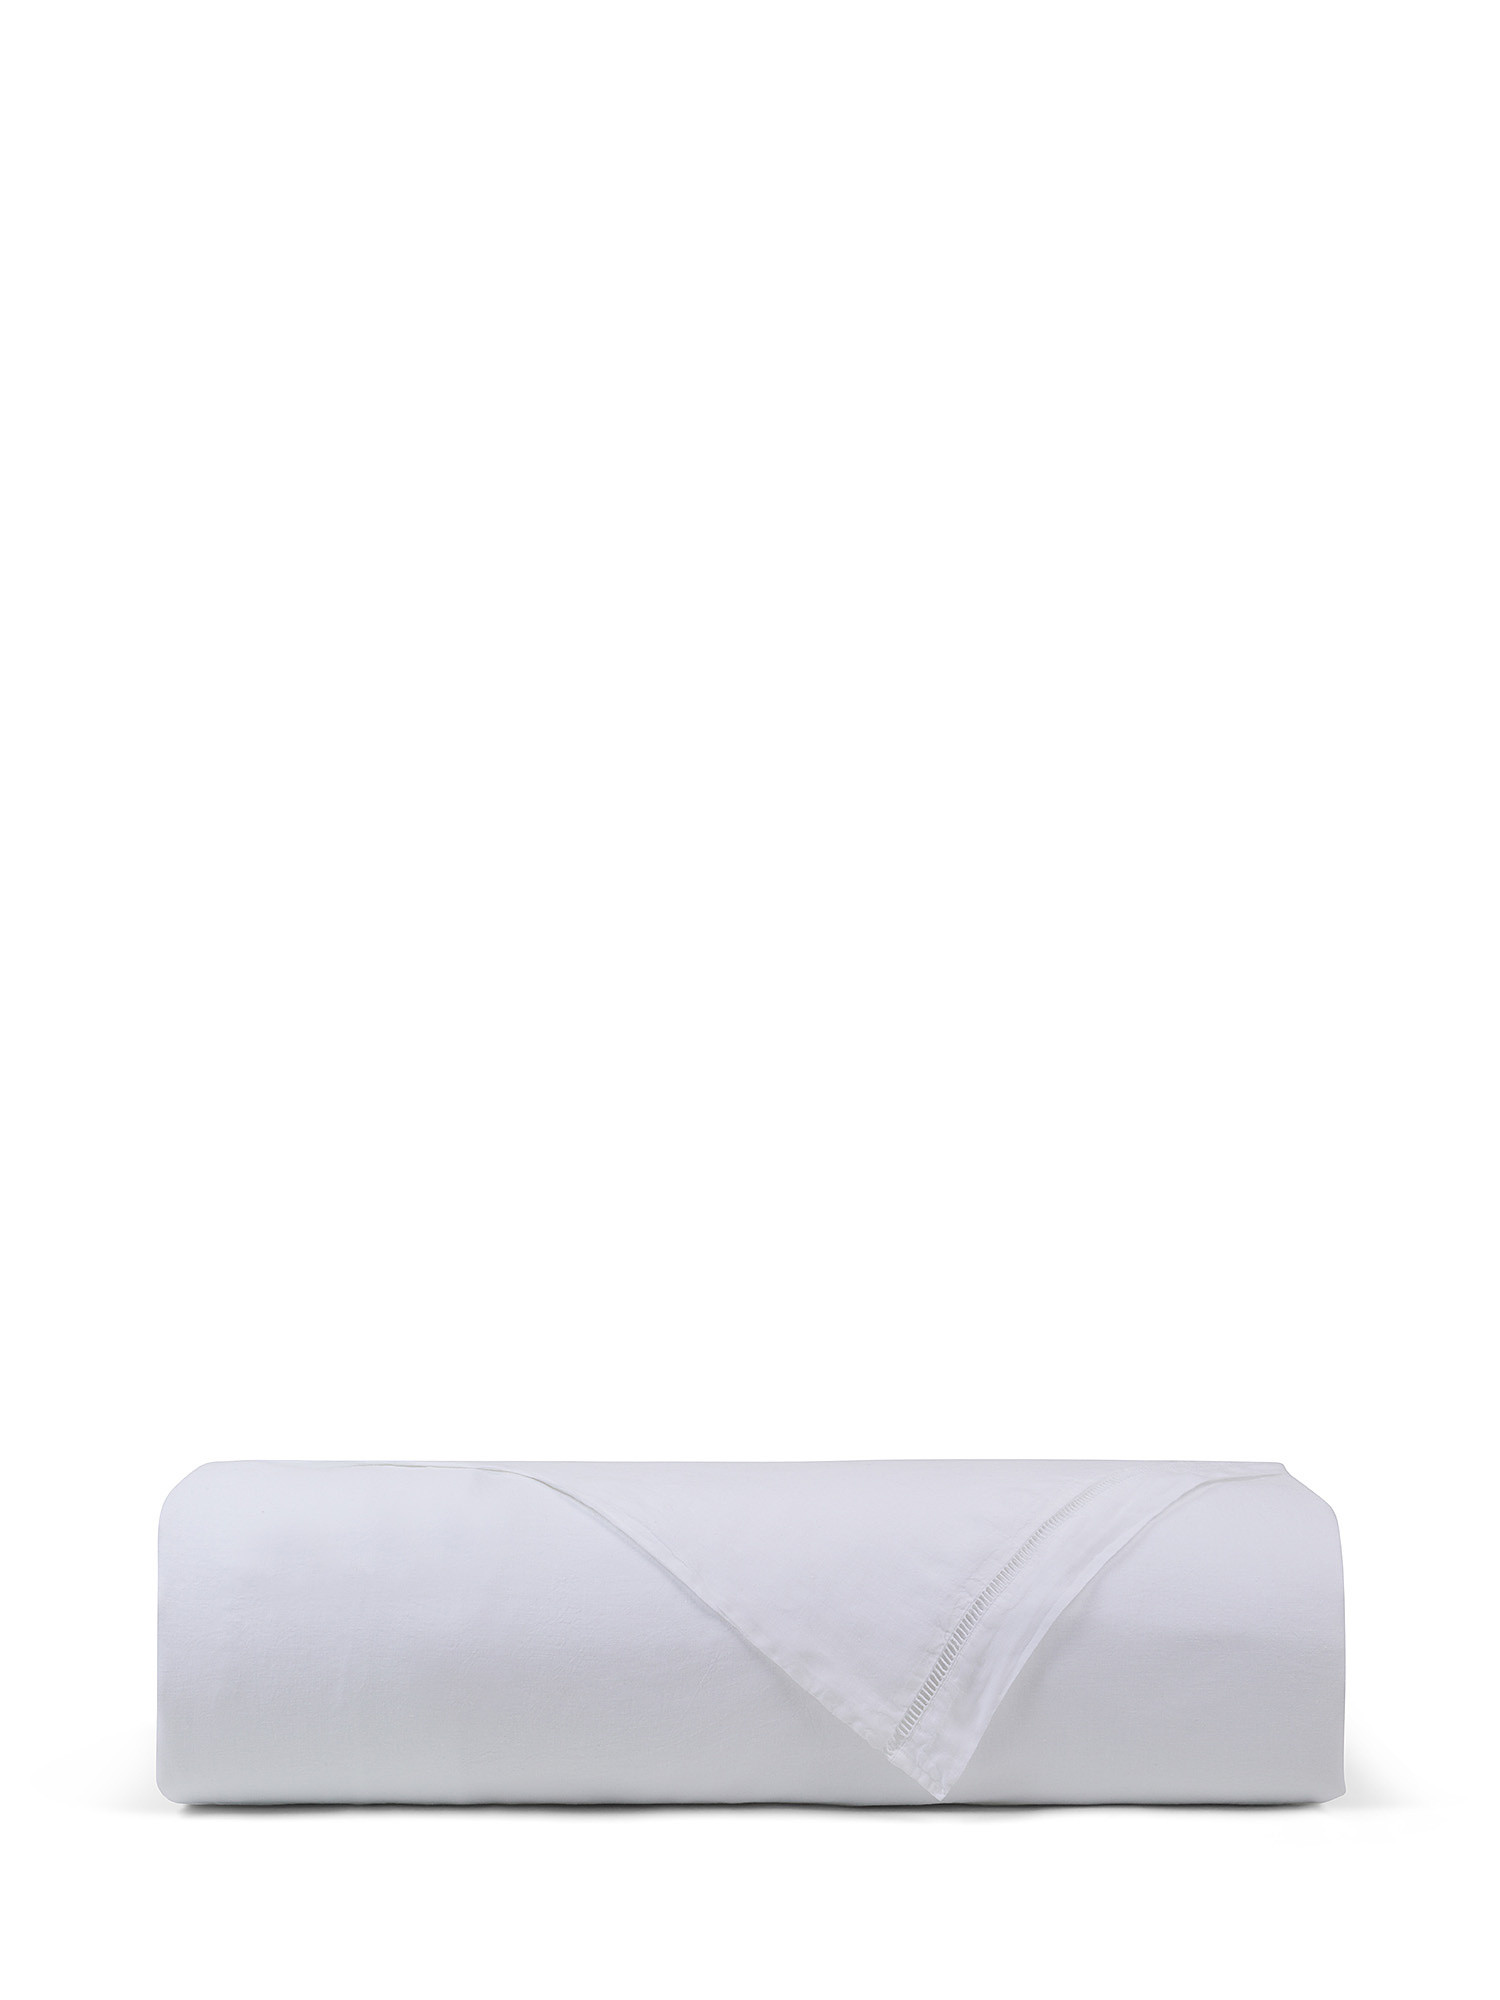 Portofino duvet cover in pure linen with a-jour hem, White, large image number 1